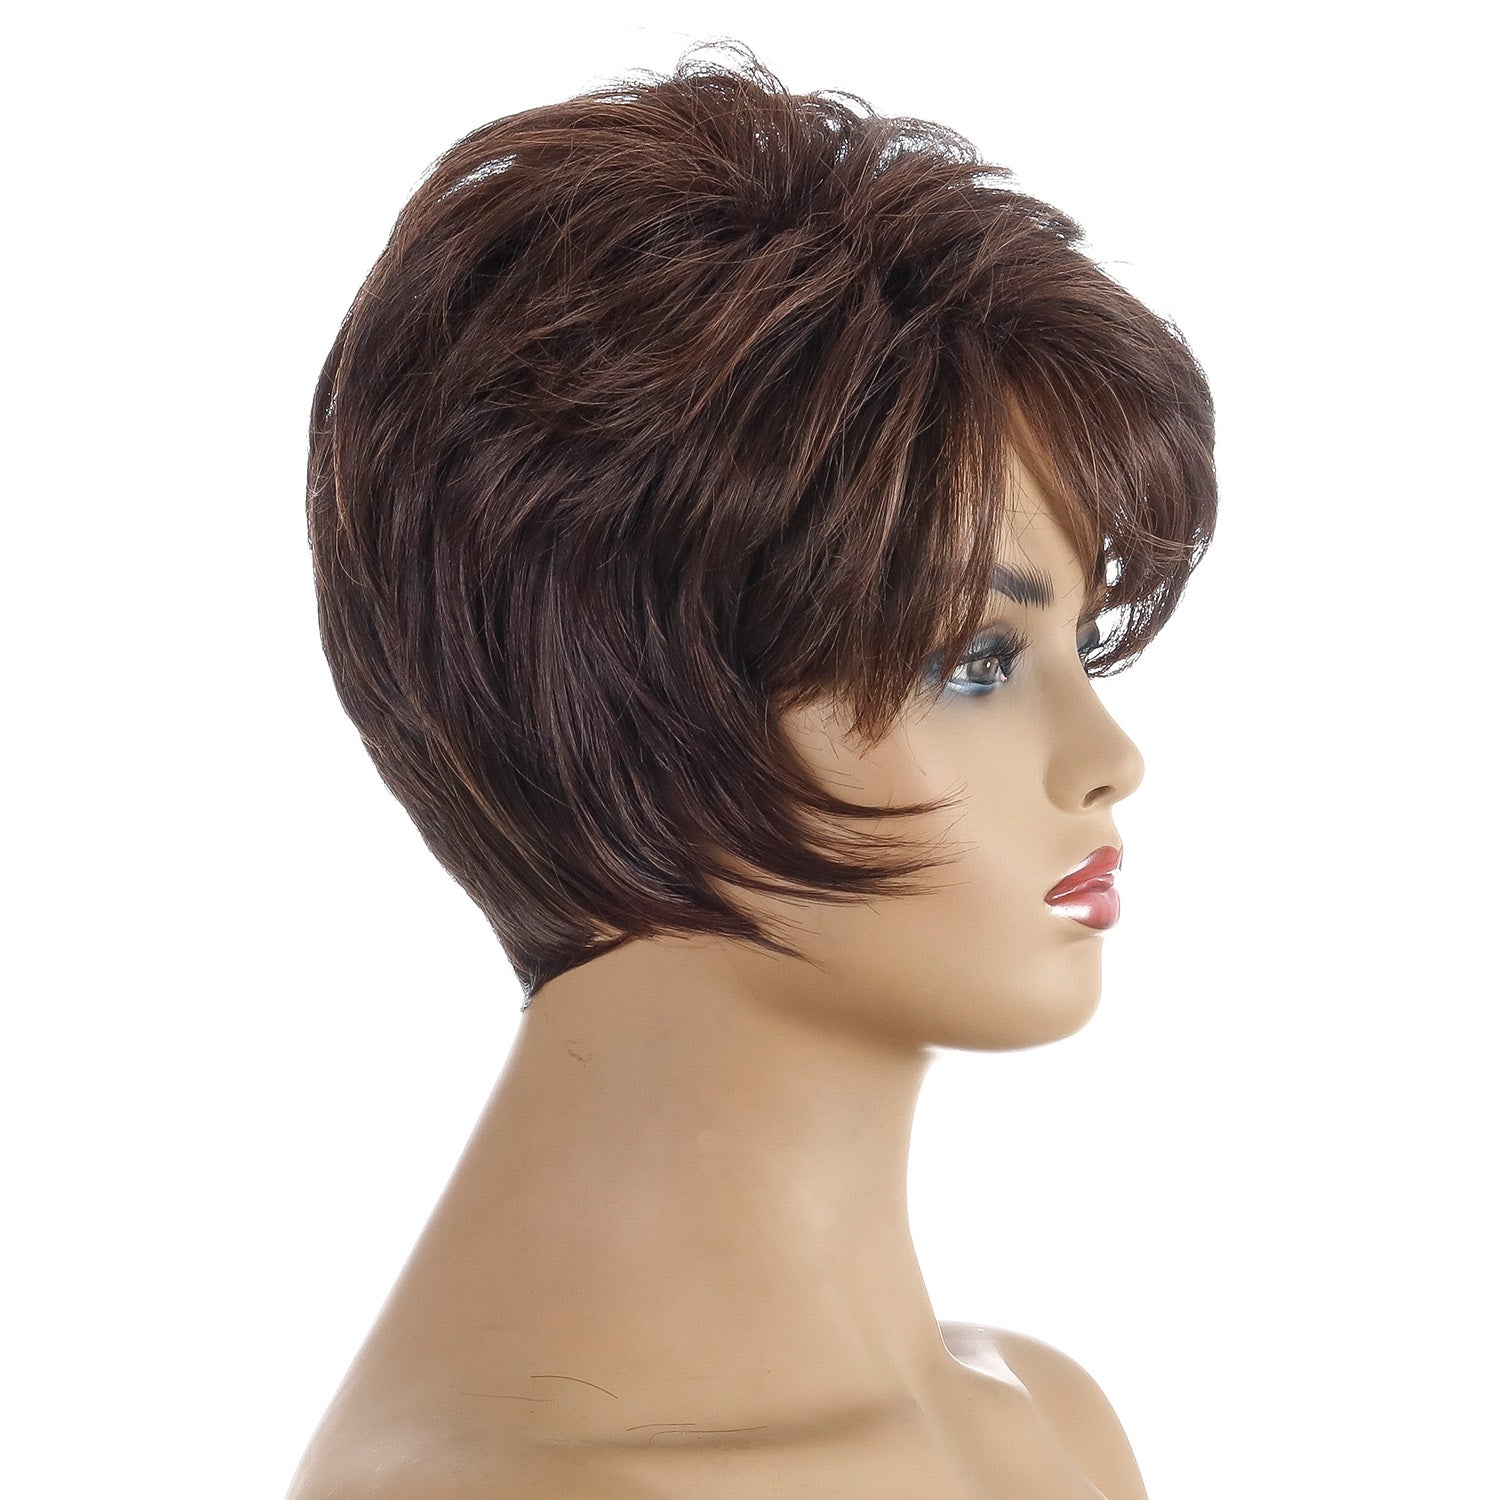 Lit | Brown Short Pixie Cut Straight Synthetic Hair Wig With Bangs